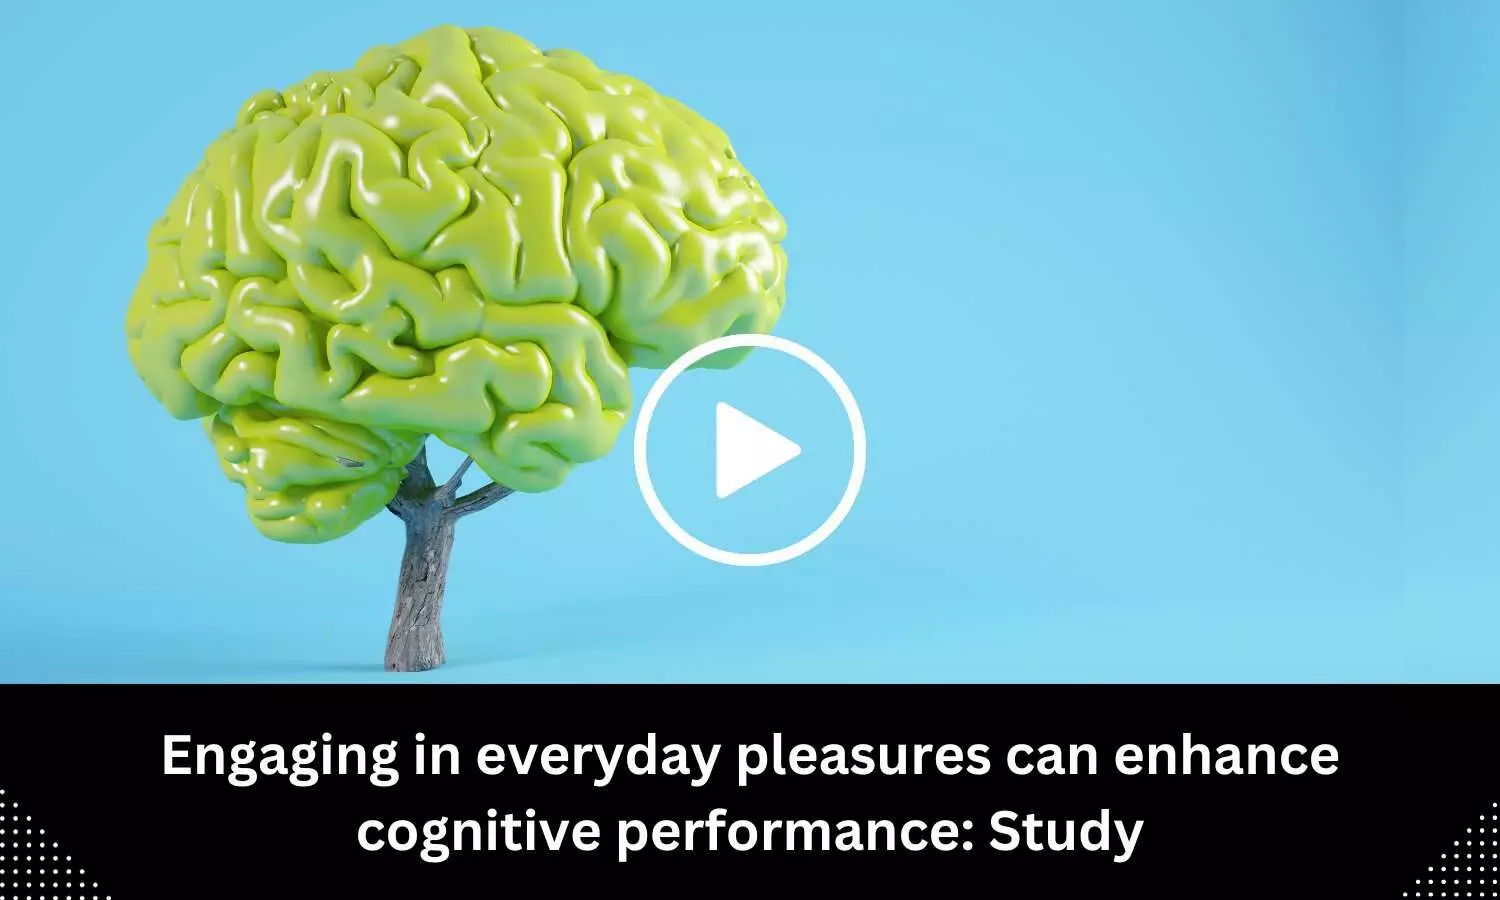 Engaging in everyday pleasures can enhance cognitive performance shows study